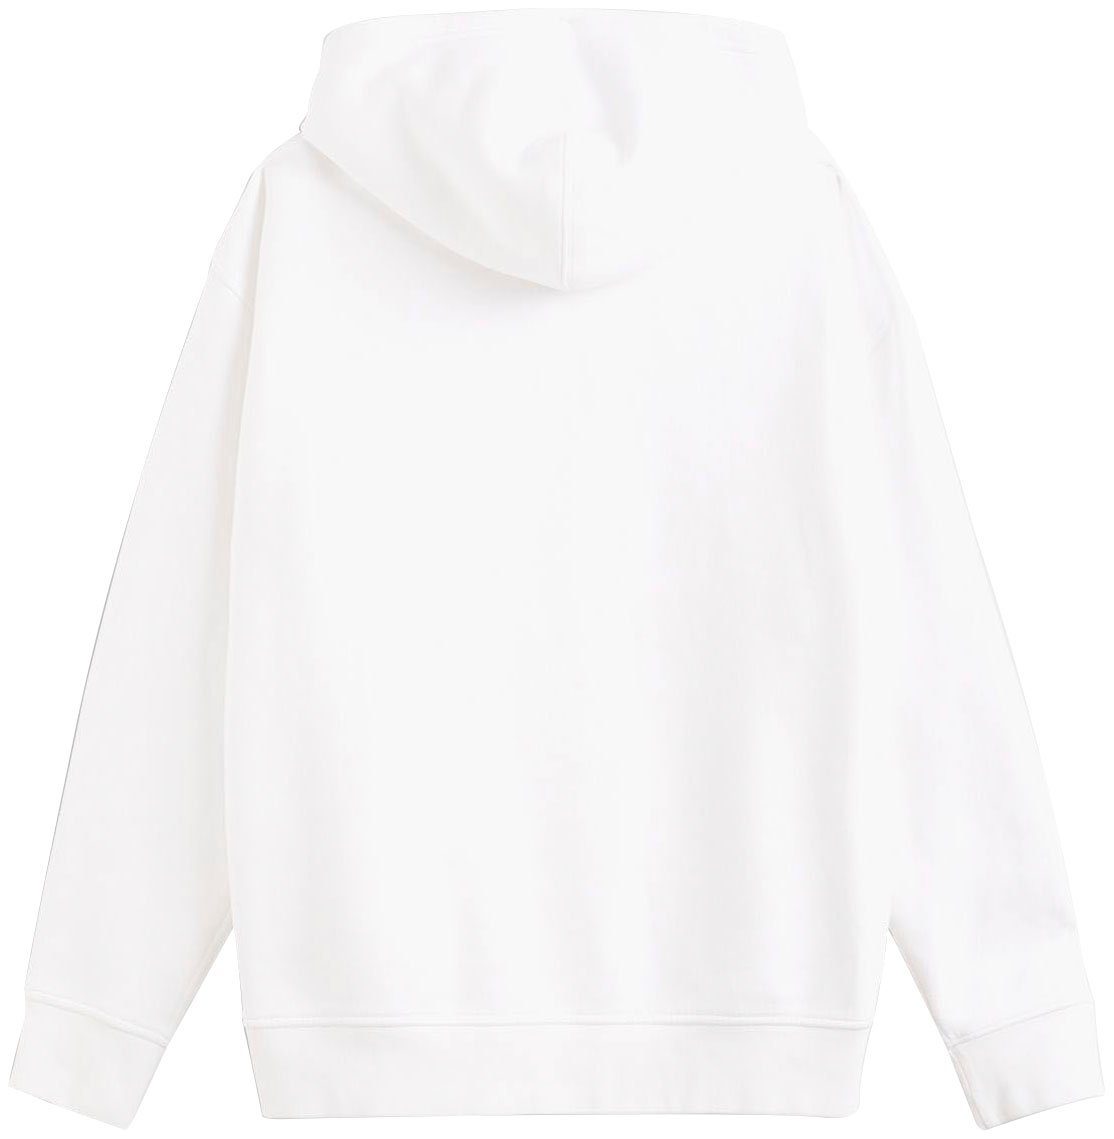 GRAPHIC T3 Hoodie Levi's® RELAXD white